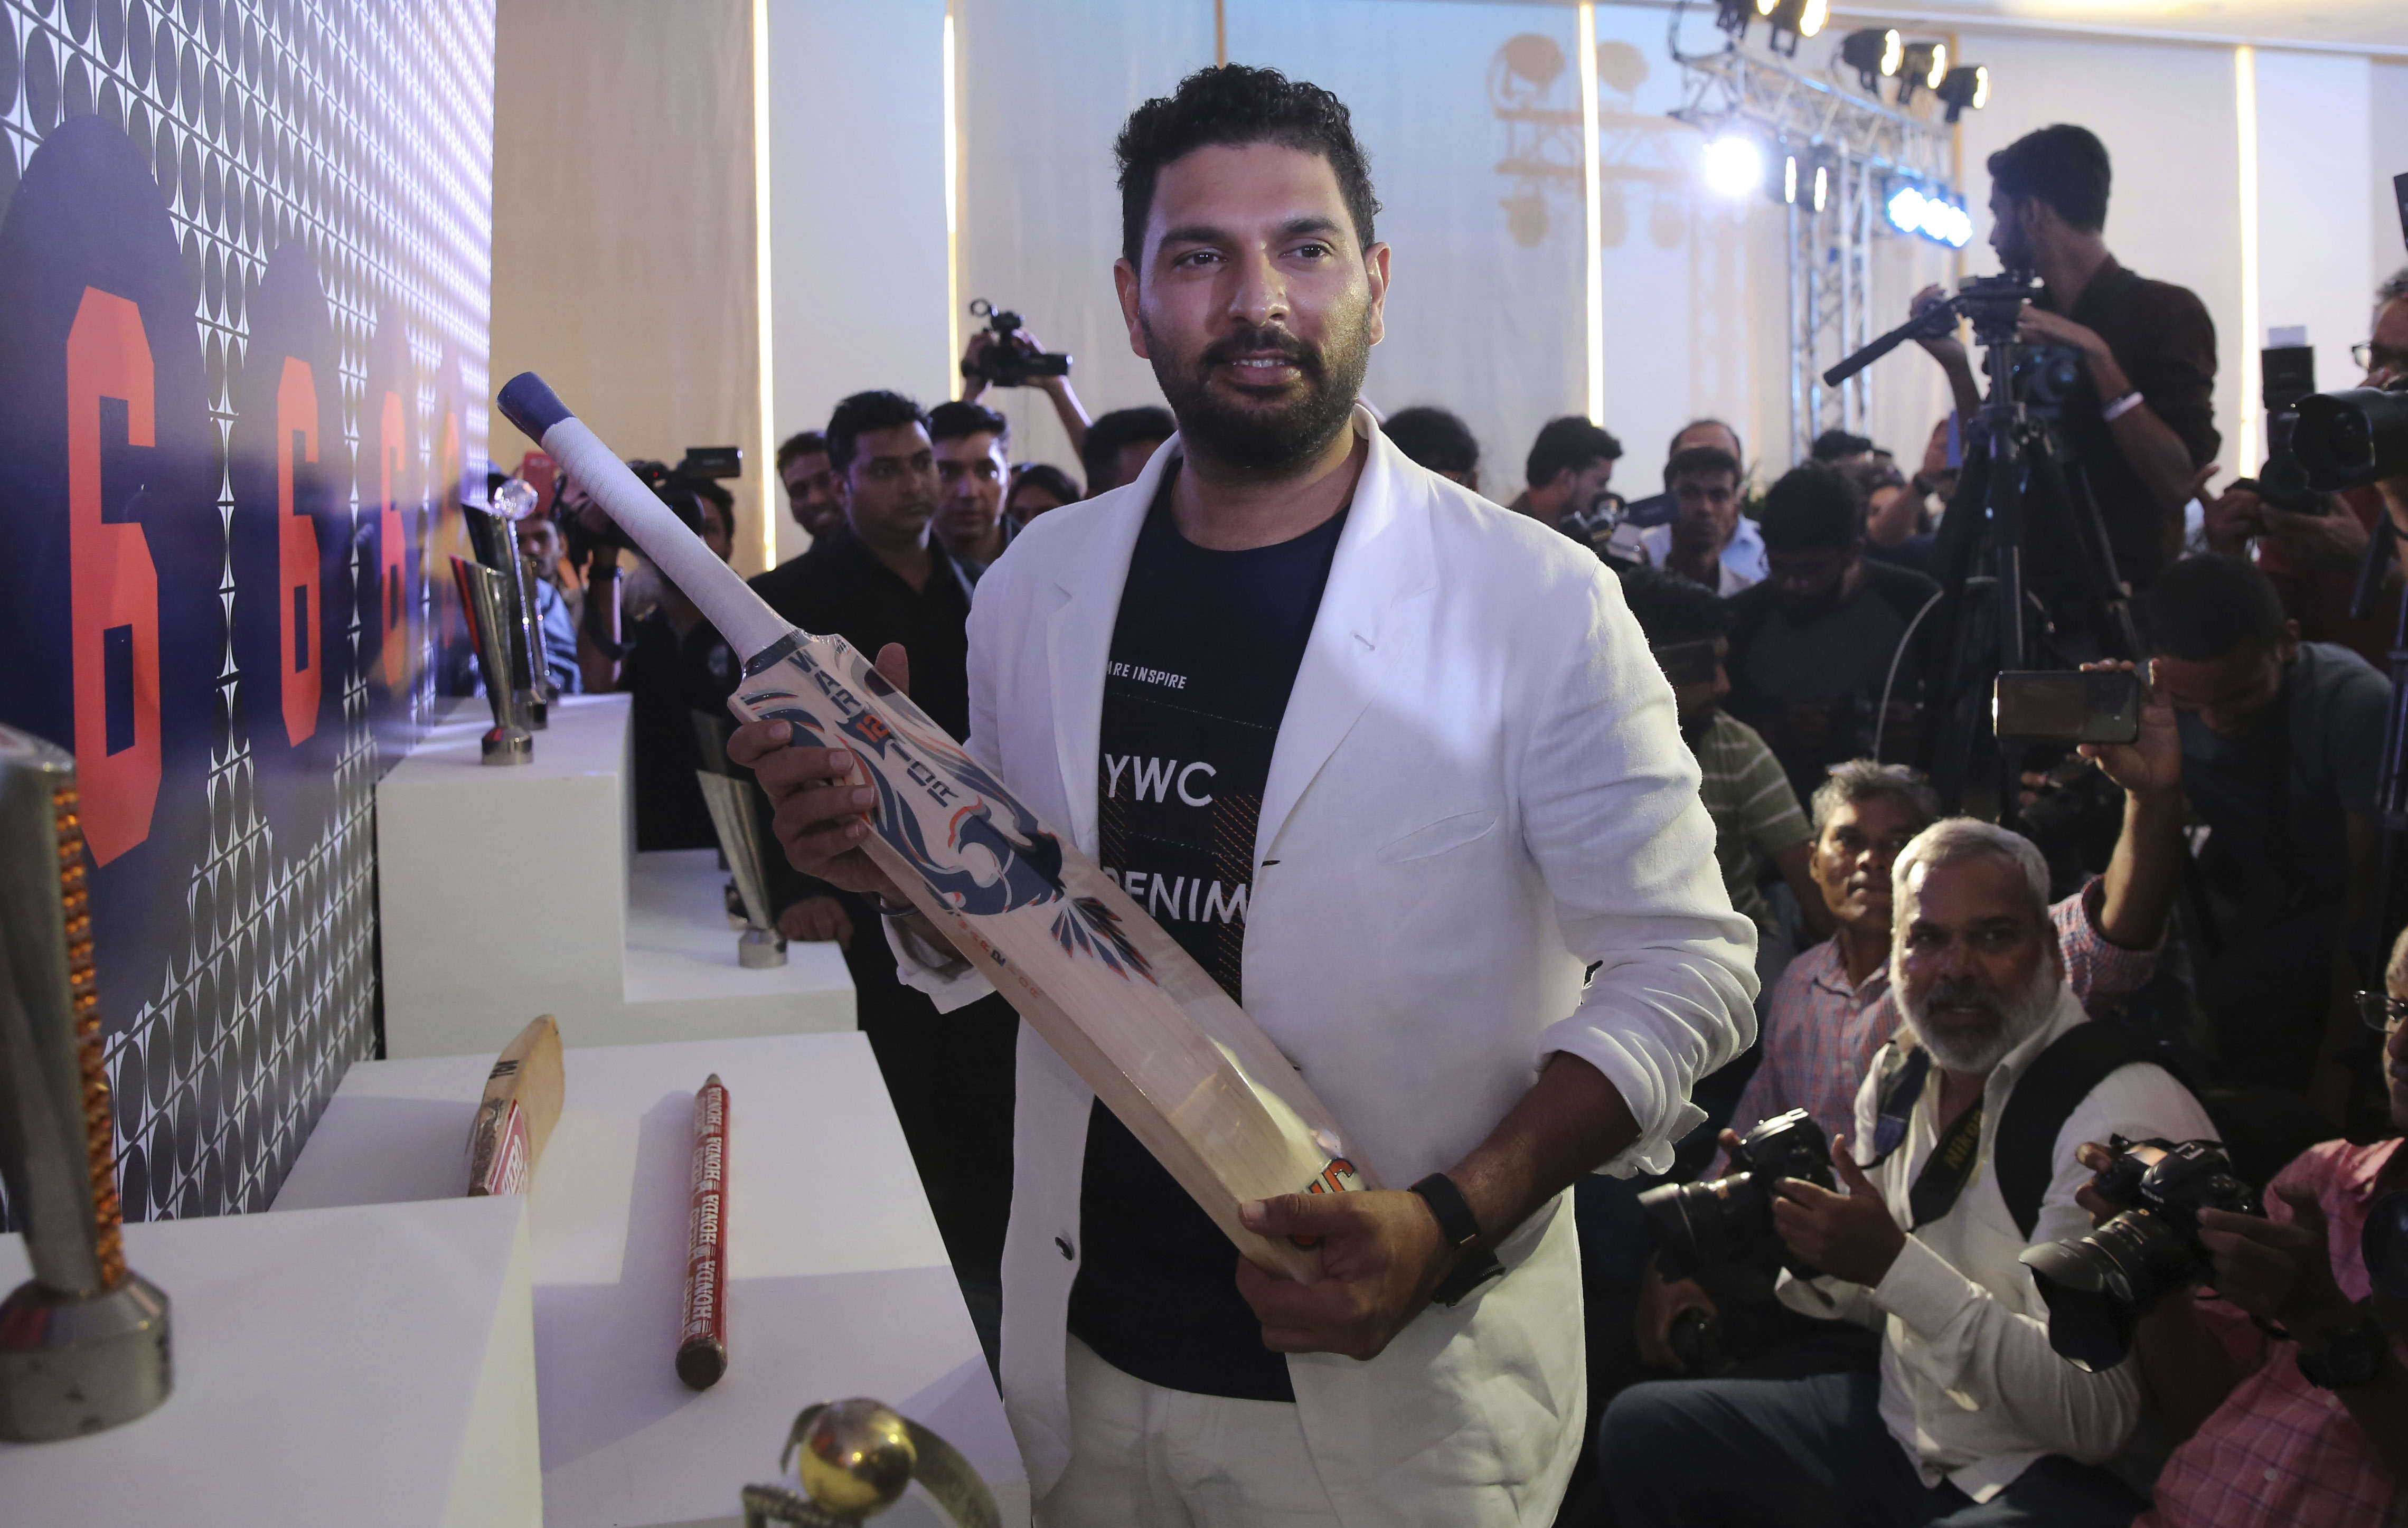 WATCH  Yuvraj Singh unveils his new hairstyle  Im loving the curls   YouTube